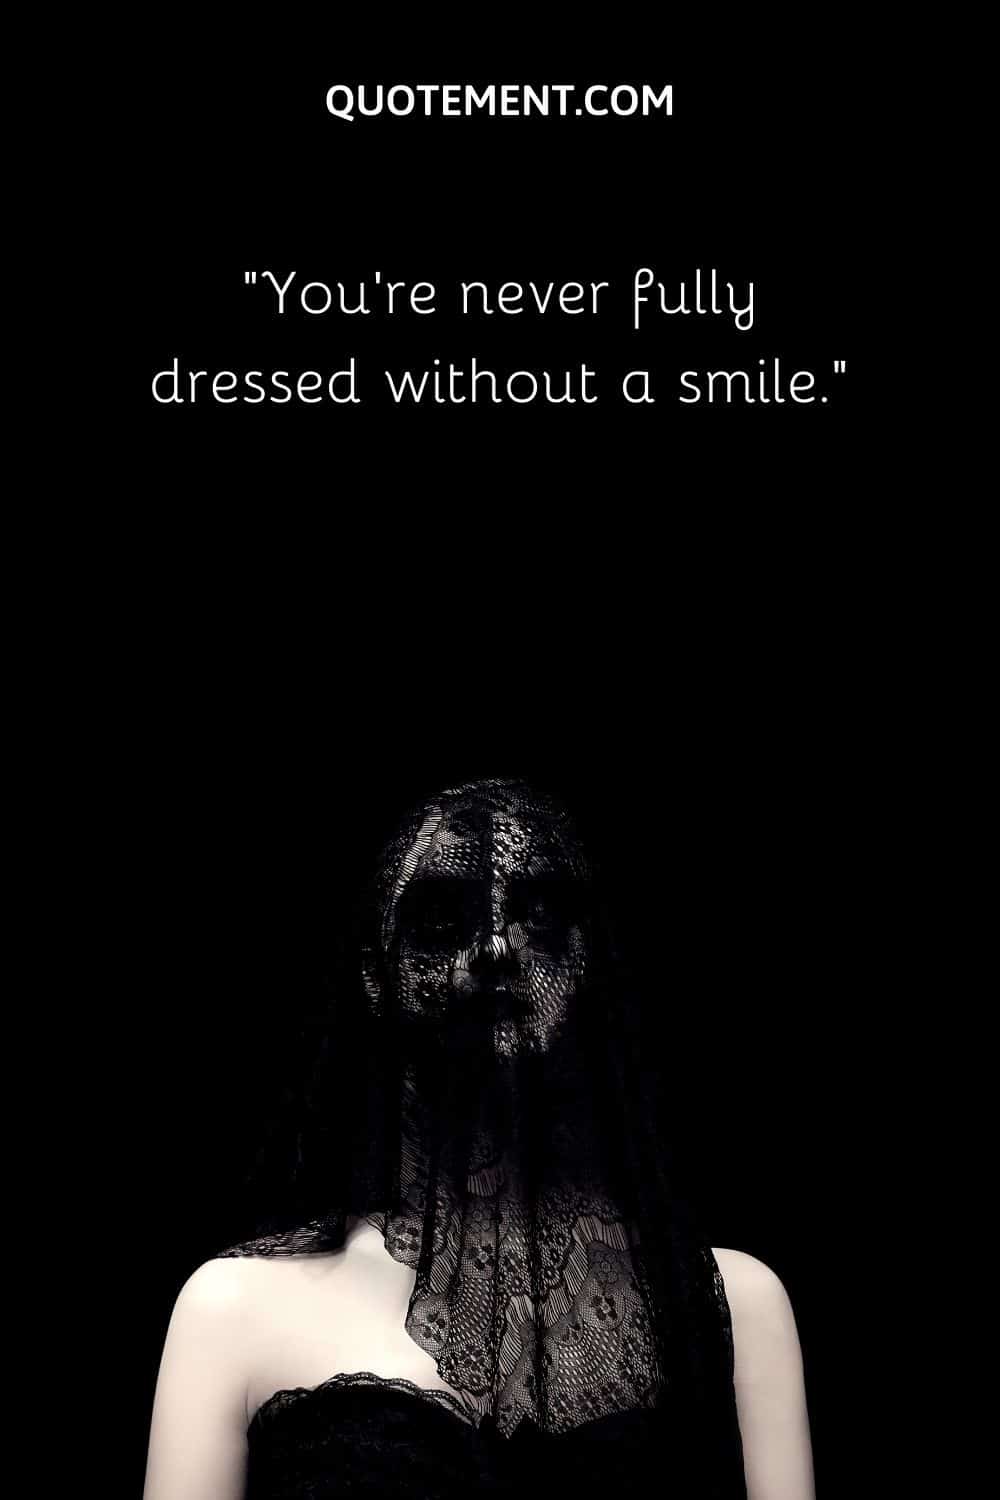 You’re never fully dressed without a smile